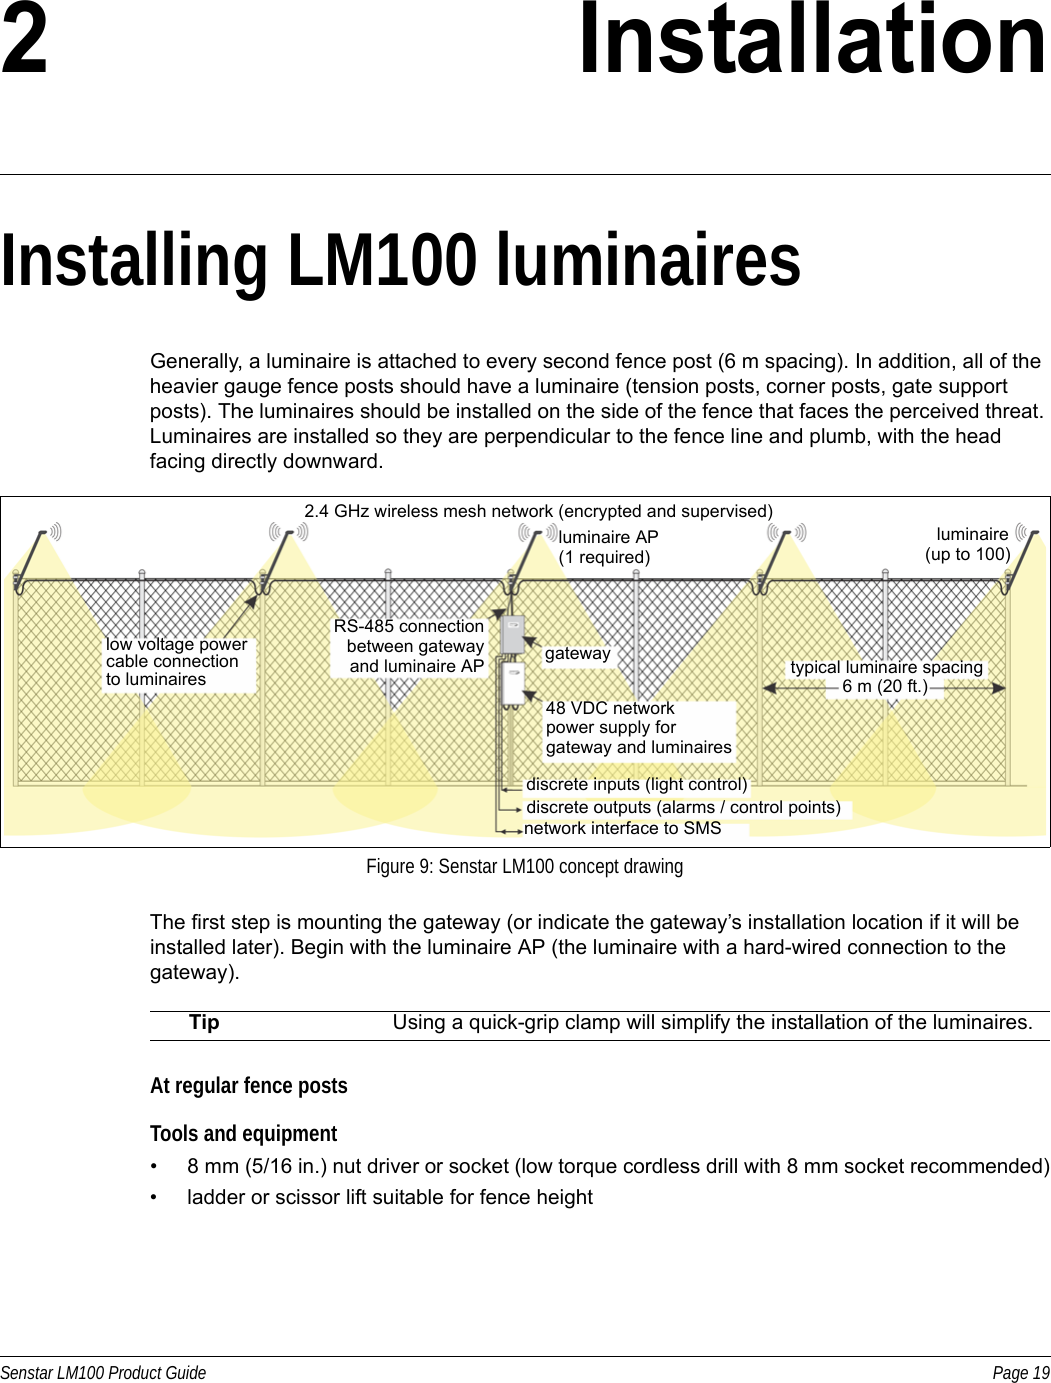 Senstar LM100 Product Guide Page 192 InstallationInstalling LM100 luminairesGenerally, a luminaire is attached to every second fence post (6 m spacing). In addition, all of the heavier gauge fence posts should have a luminaire (tension posts, corner posts, gate support posts). The luminaires should be installed on the side of the fence that faces the perceived threat. Luminaires are installed so they are perpendicular to the fence line and plumb, with the head facing directly downward.The first step is mounting the gateway (or indicate the gateway’s installation location if it will be installed later). Begin with the luminaire AP (the luminaire with a hard-wired connection to the gateway).At regular fence postsTools and equipment• 8 mm (5/16 in.) nut driver or socket (low torque cordless drill with 8 mm socket recommended)• ladder or scissor lift suitable for fence heightFigure 9: Senstar LM100 concept drawingTip Using a quick-grip clamp will simplify the installation of the luminaires.2.4 GHz wireless mesh network (encrypted and supervised)luminaire AP luminairegateway48 VDC networkRS-485 connectionlow voltage powerto luminaires typical luminaire spacing6 m (20 ft.)cable connection(up to 100)(1 required)discrete inputs (light control)discrete outputs (alarms / control points)network interface to SMSpower supply forgateway and luminaires between gateway and luminaire AP 